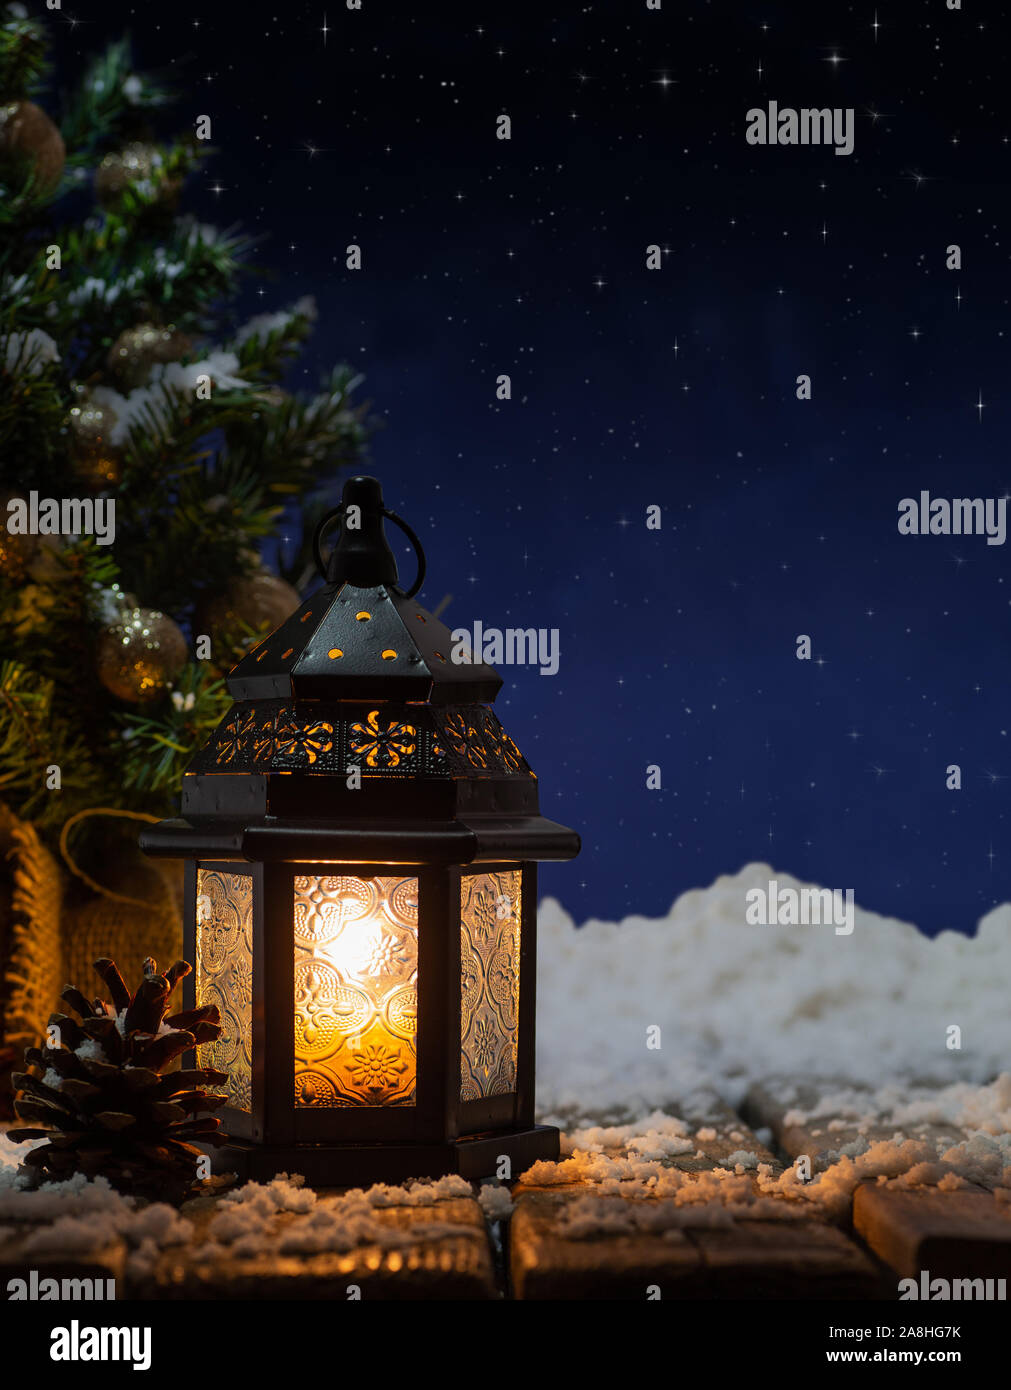 Glowing lantern with Christmas tree in background under a starry night sky Stock Photo